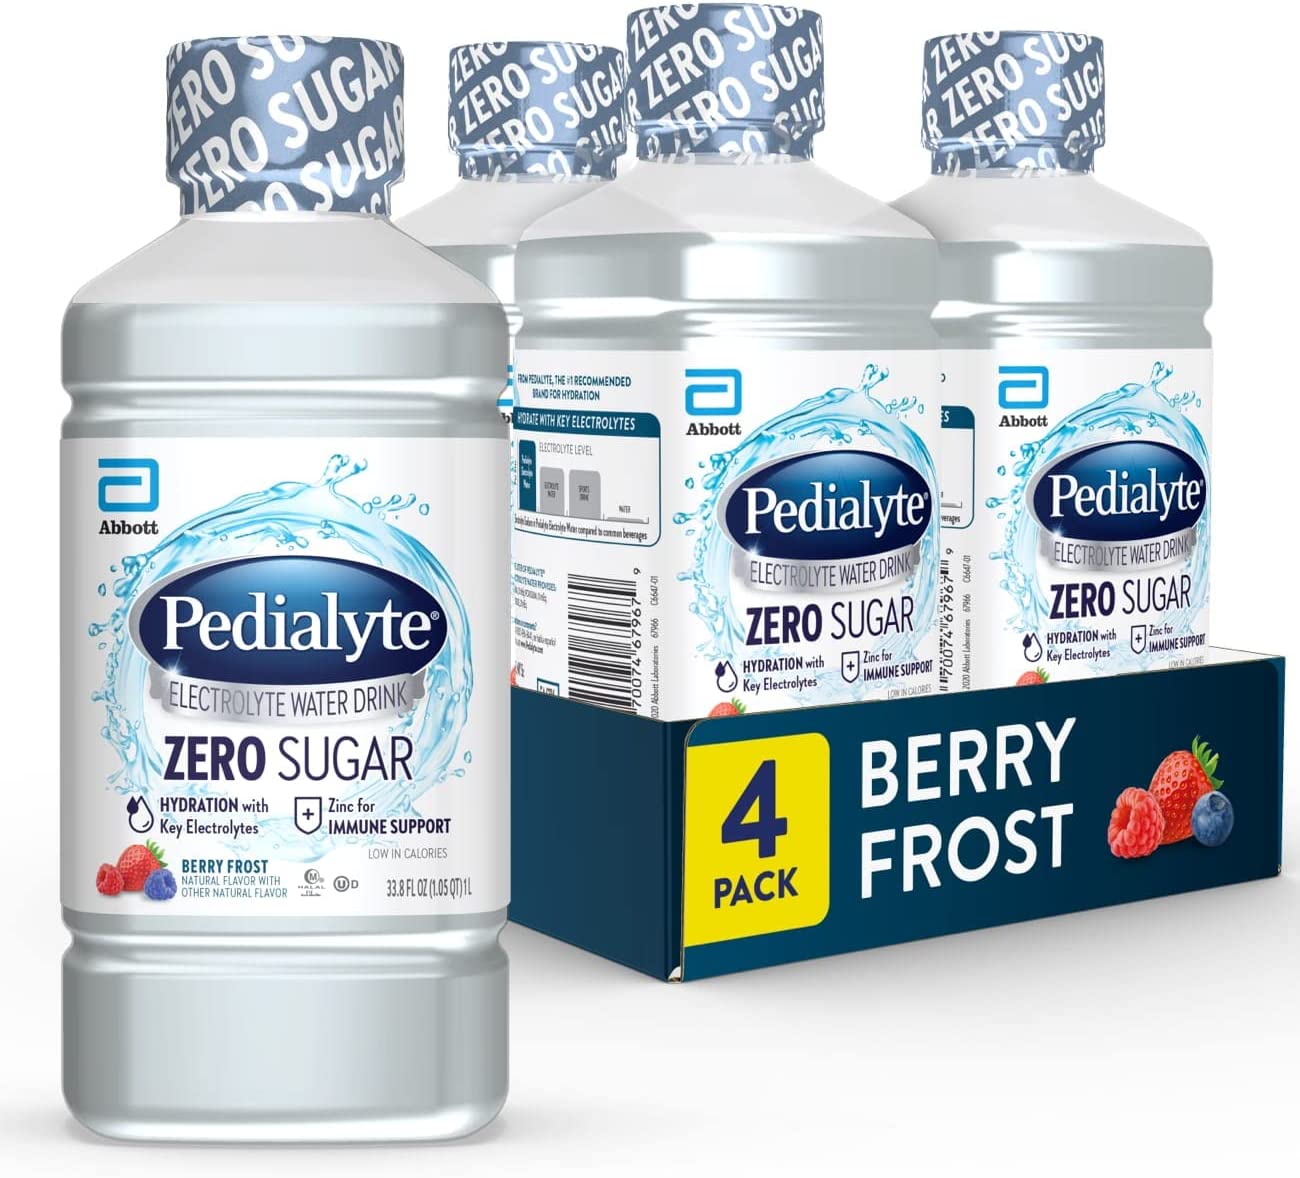 4-Count 1-Liter Pedialyte Electrolyte Hydration Water w/ Zero Sugar (Berry Frost) $6 $5.98